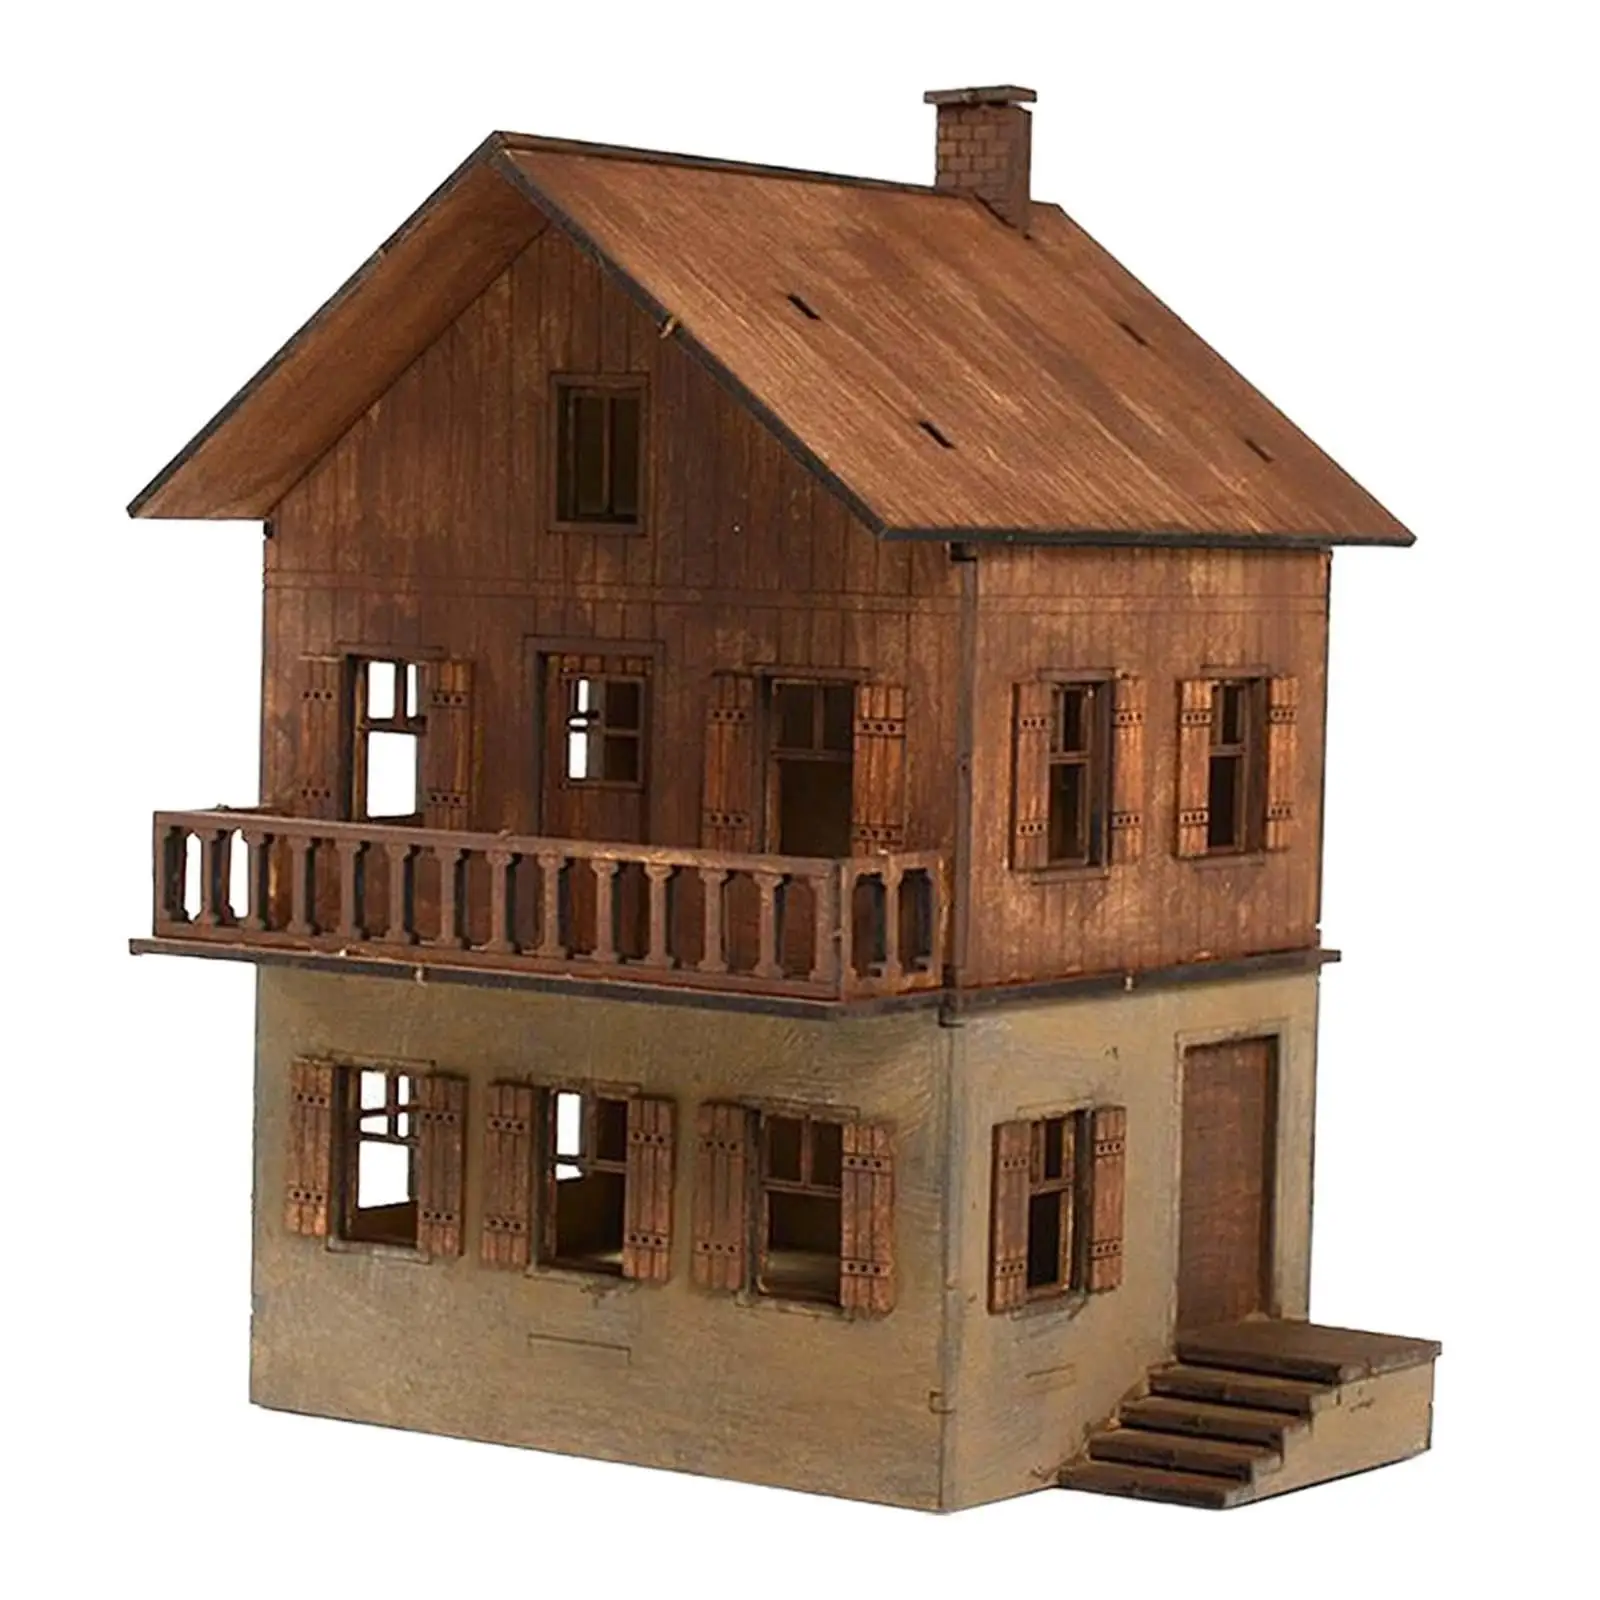 Wooden Model Kits House Learning Educational Toys DIY Wooden House Assemble Miniature Scene Layout DIY Projects Accessory